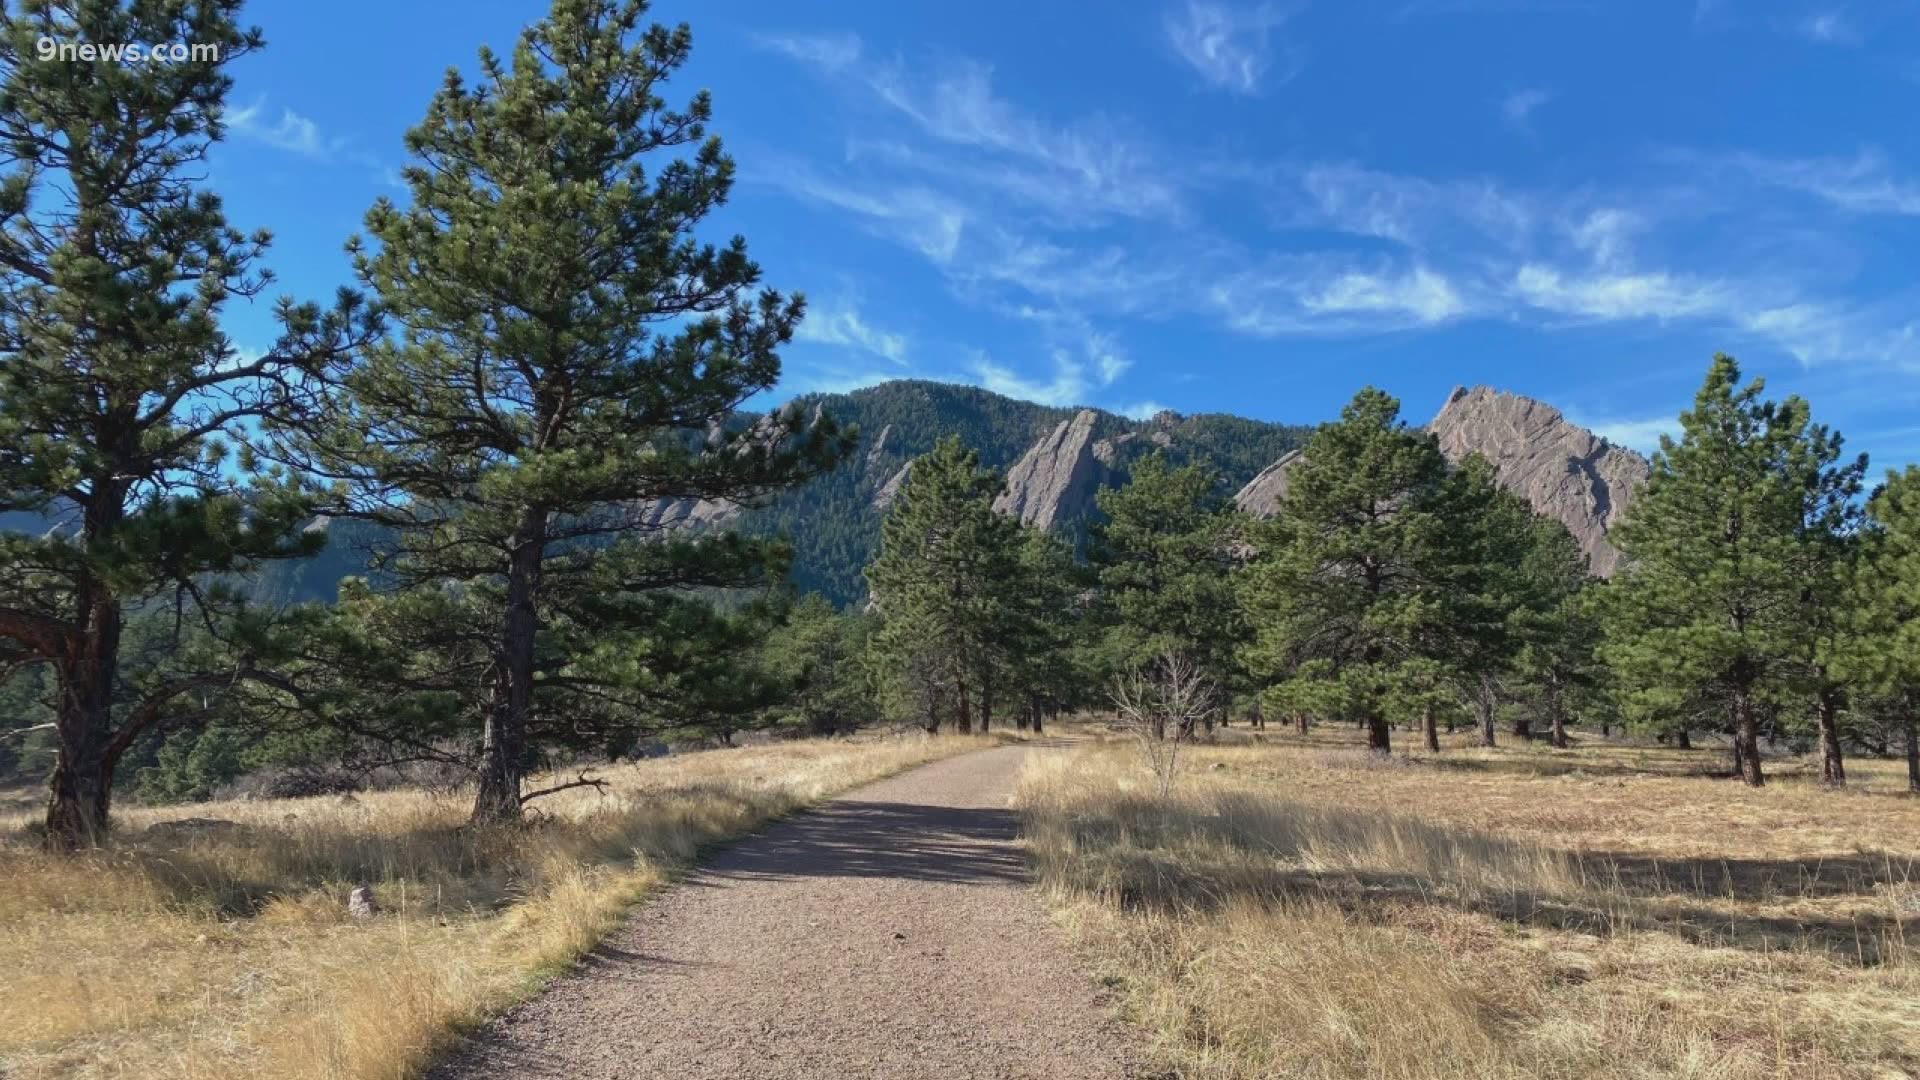 Enchanted Mesa is a two-mile trail in Boulder with views of the Flatirons.